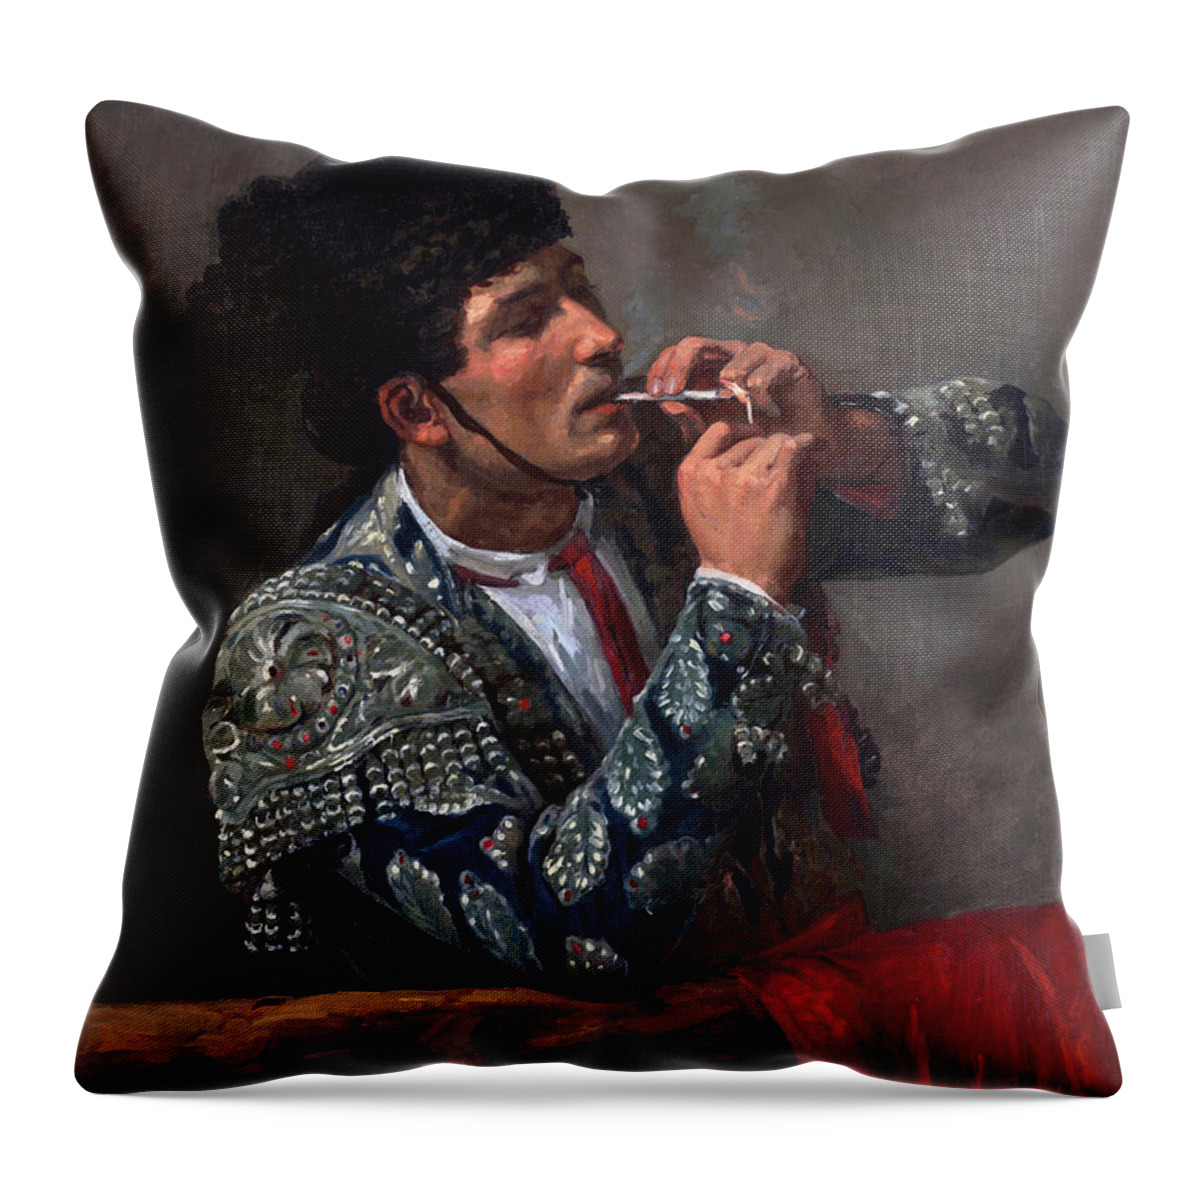 After The Bullfight Throw Pillow featuring the painting After the Bullfight #5 by Mary Cassatt